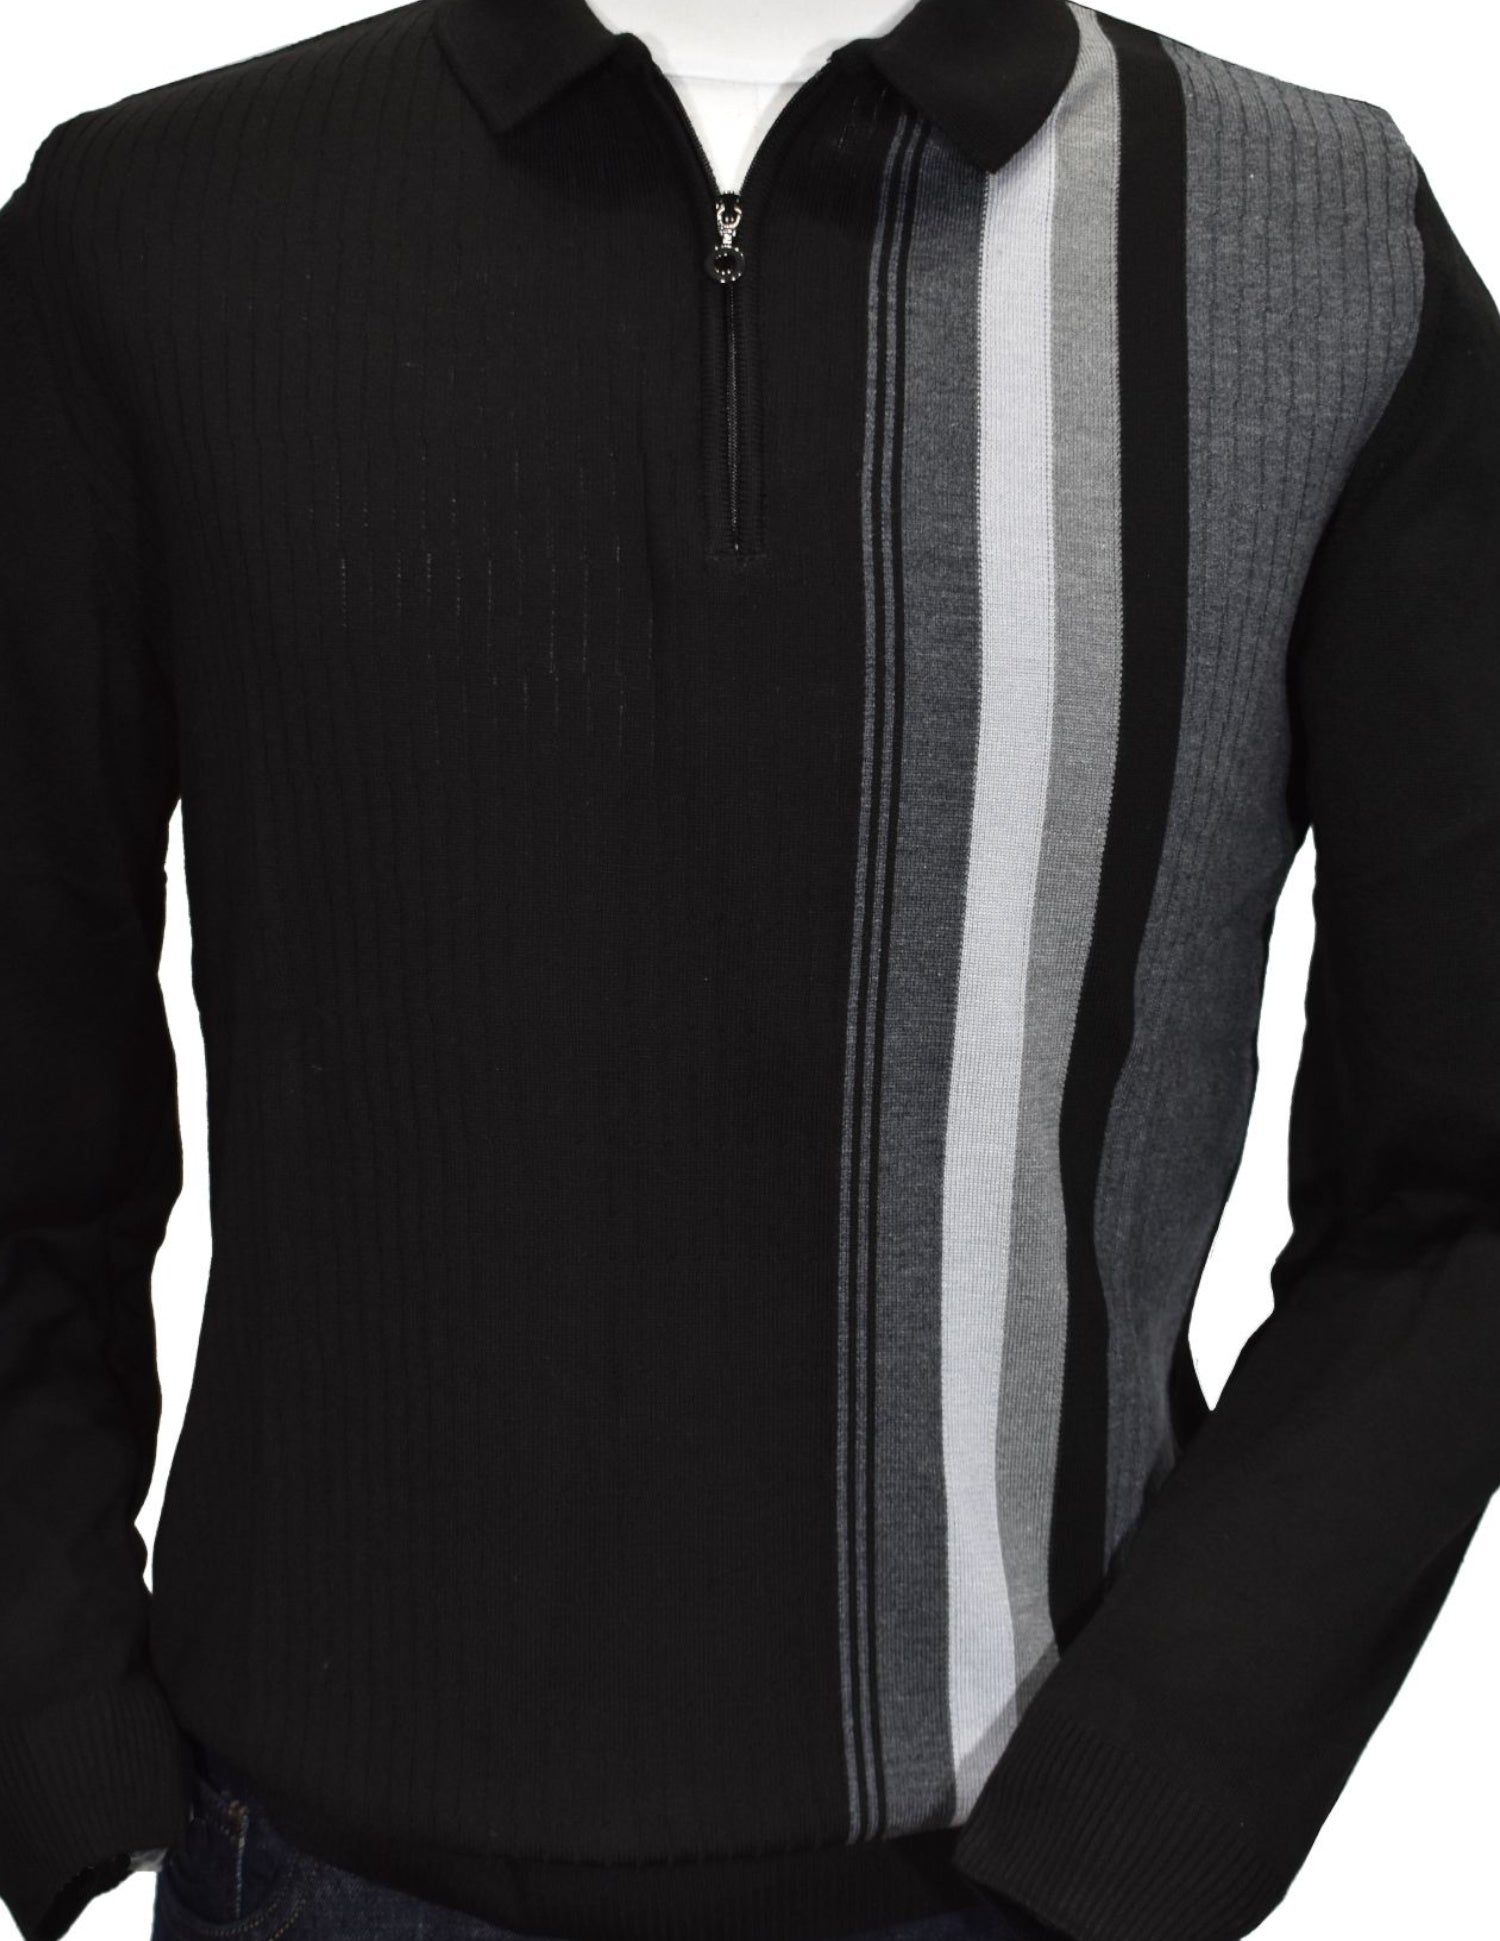 This 885 Antony Vertical Knit is a unique piece of craftsmanship. Made with luxurious ultra merino blended yarns, the iconic vertical jacquard design offers a sophisticated, exclusive look that pairs elegantly with any gray or black bottoms. The classic polo collar is a timeless touch, while the fine zipper completes the look. Light weight and with a perfect fit, no wardrobe is complete without this exclusive piece.  Classic fit.